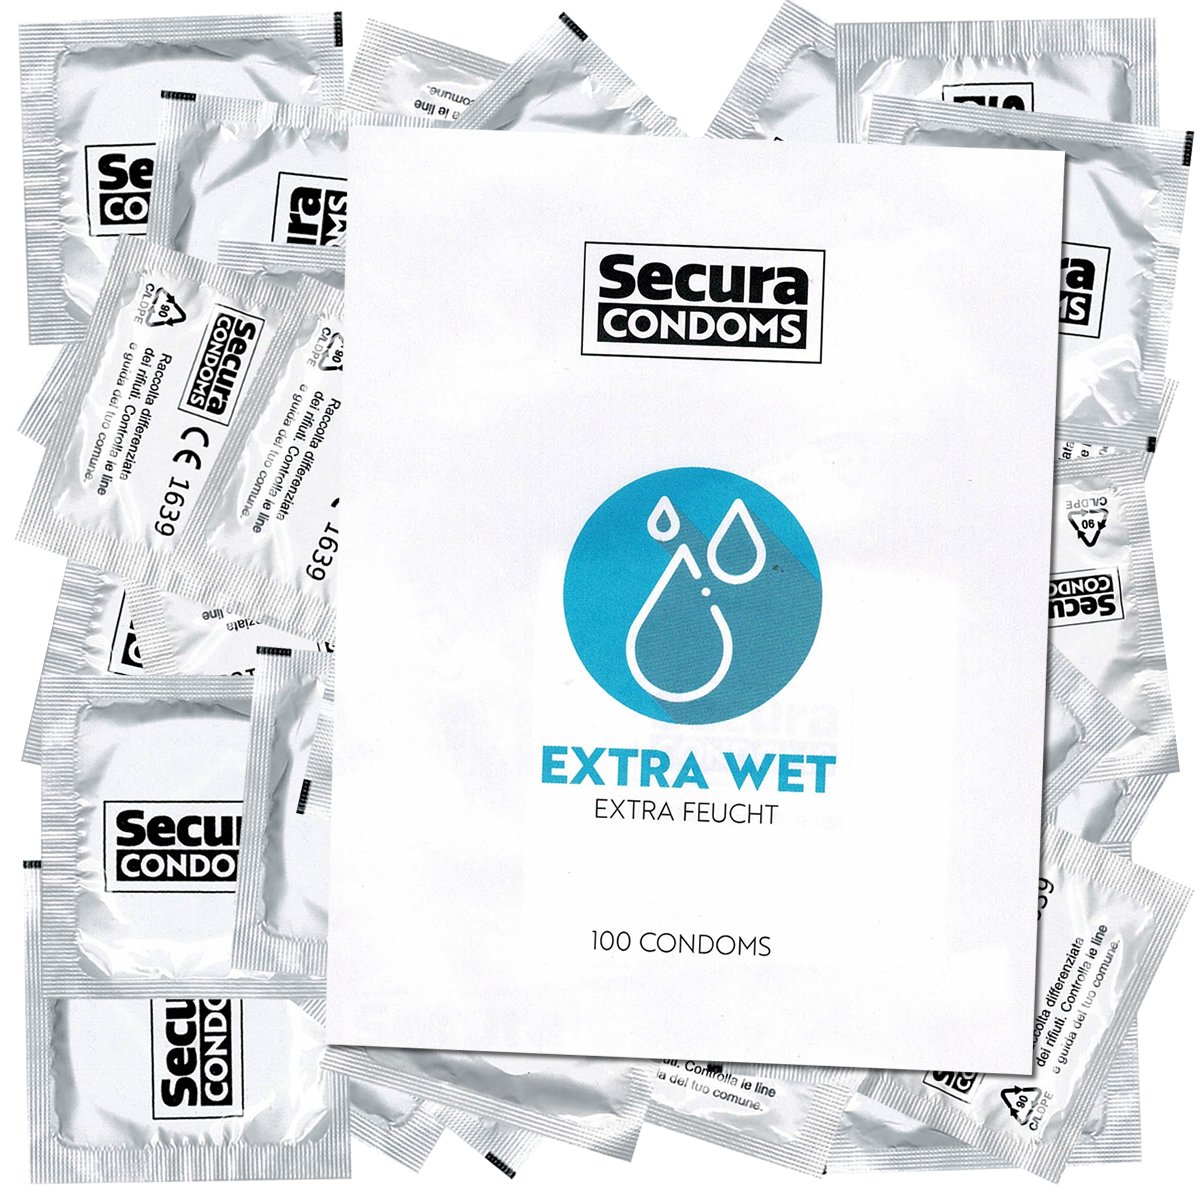 Secura «Extra Wet» 100 extra wet condoms for long lasting fun